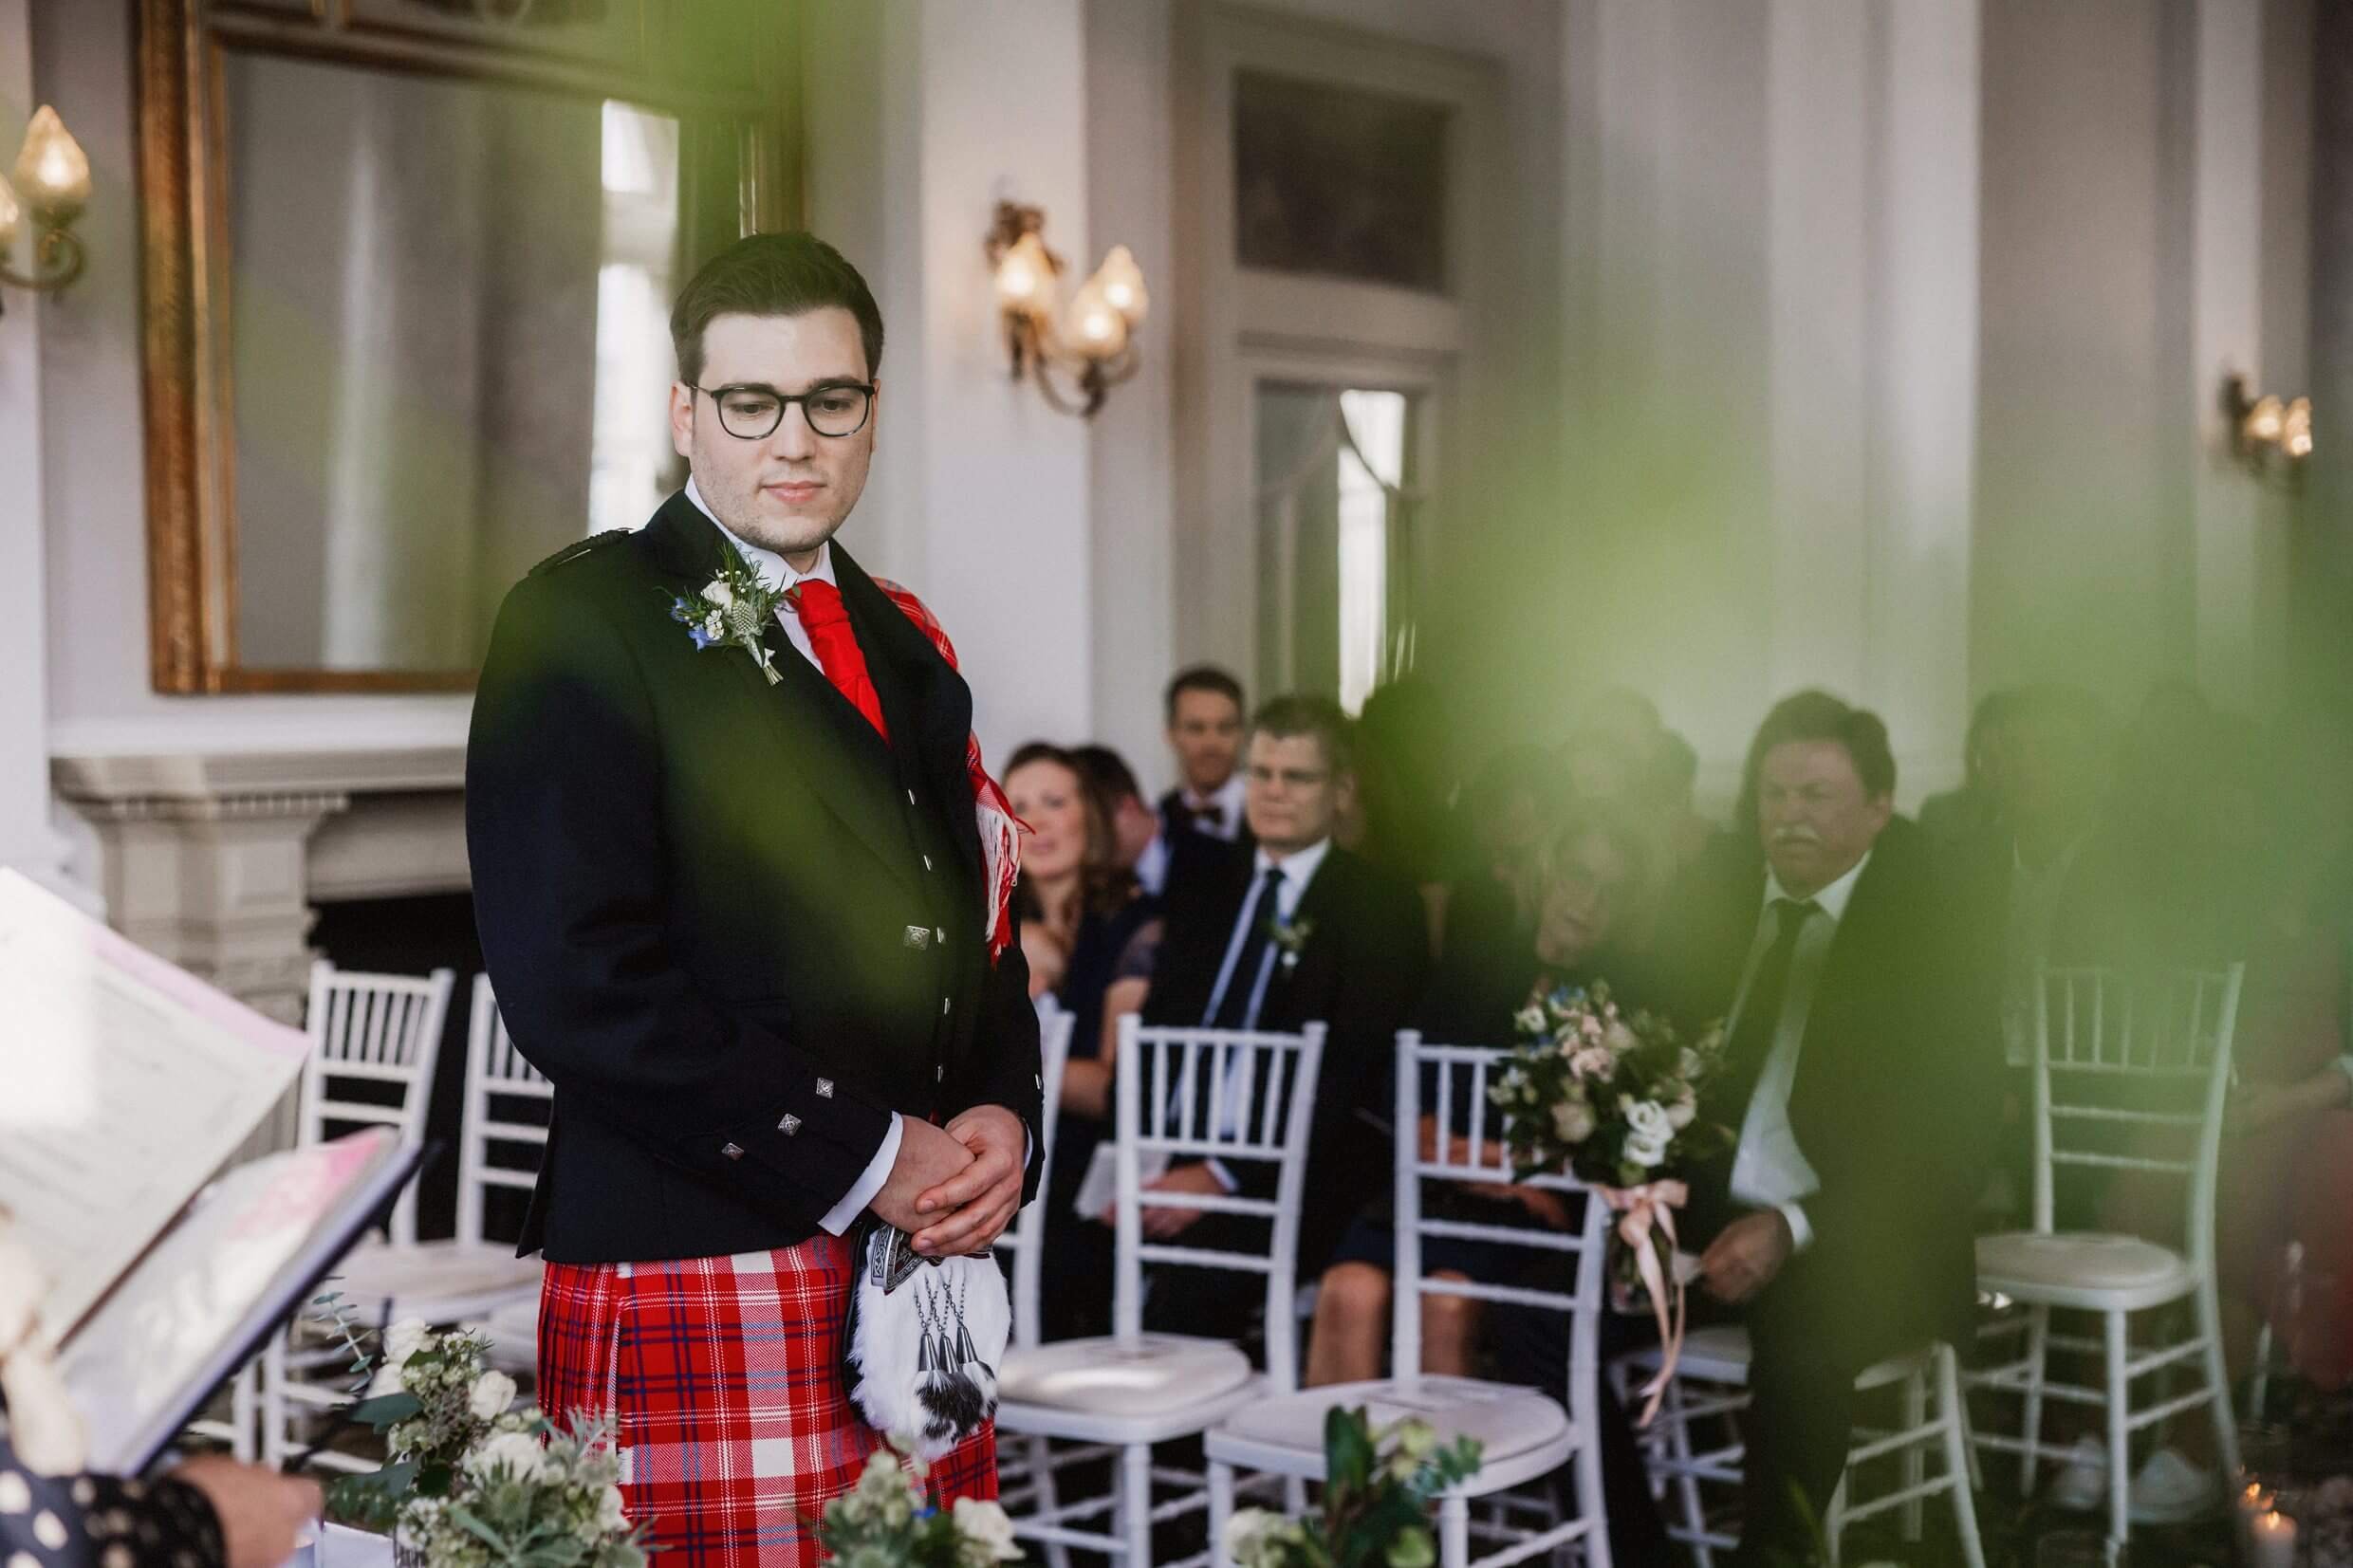 inside interior view of the balmoral hotel edinburgh wedding venue in scotland showing the groom standing at the top of the aisle in front of seated guests